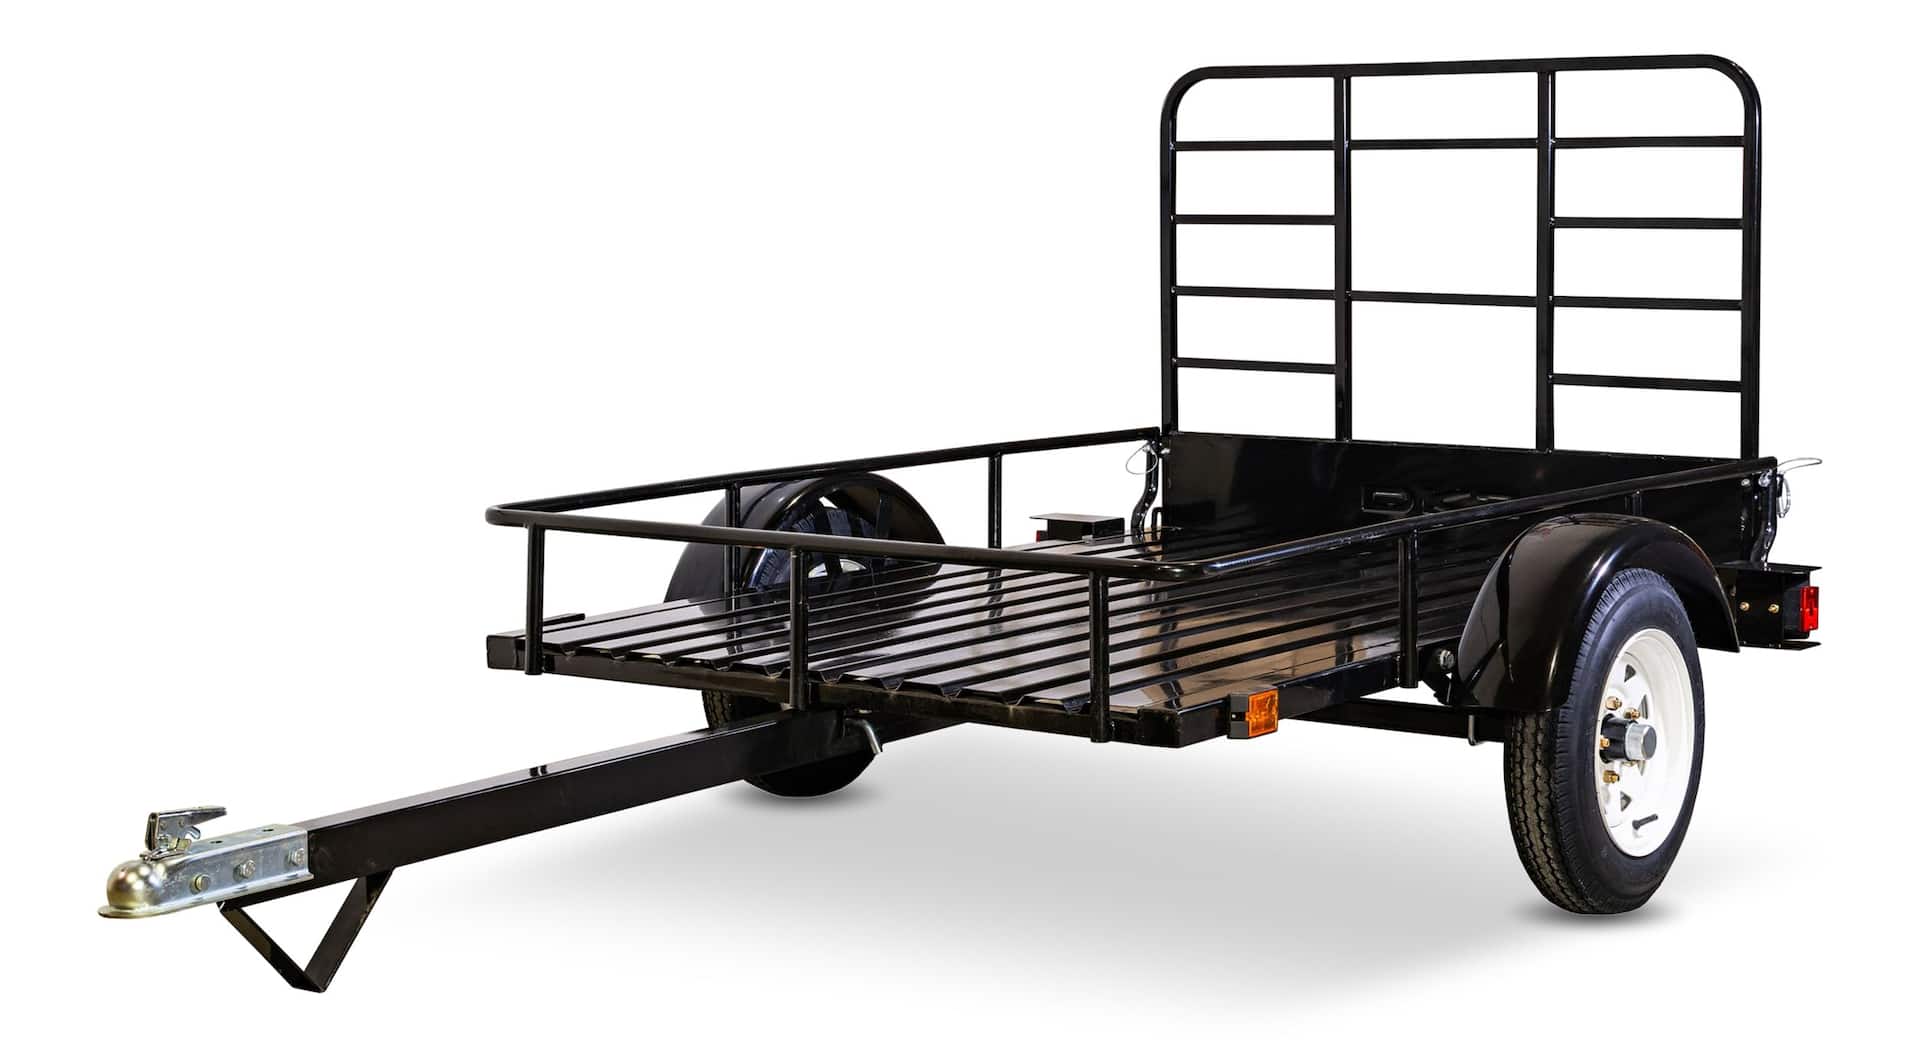 https://media-www.canadiantire.ca/product/automotive/automotive-outdoor-adventure/auto-travel-storage/3995078/detail-k2-mighty-4x6-open-rail-multi-a-utility-trailer-25503fab-2fa9-4488-a5e0-4ea8a8bf1397-jpgrendition.jpg